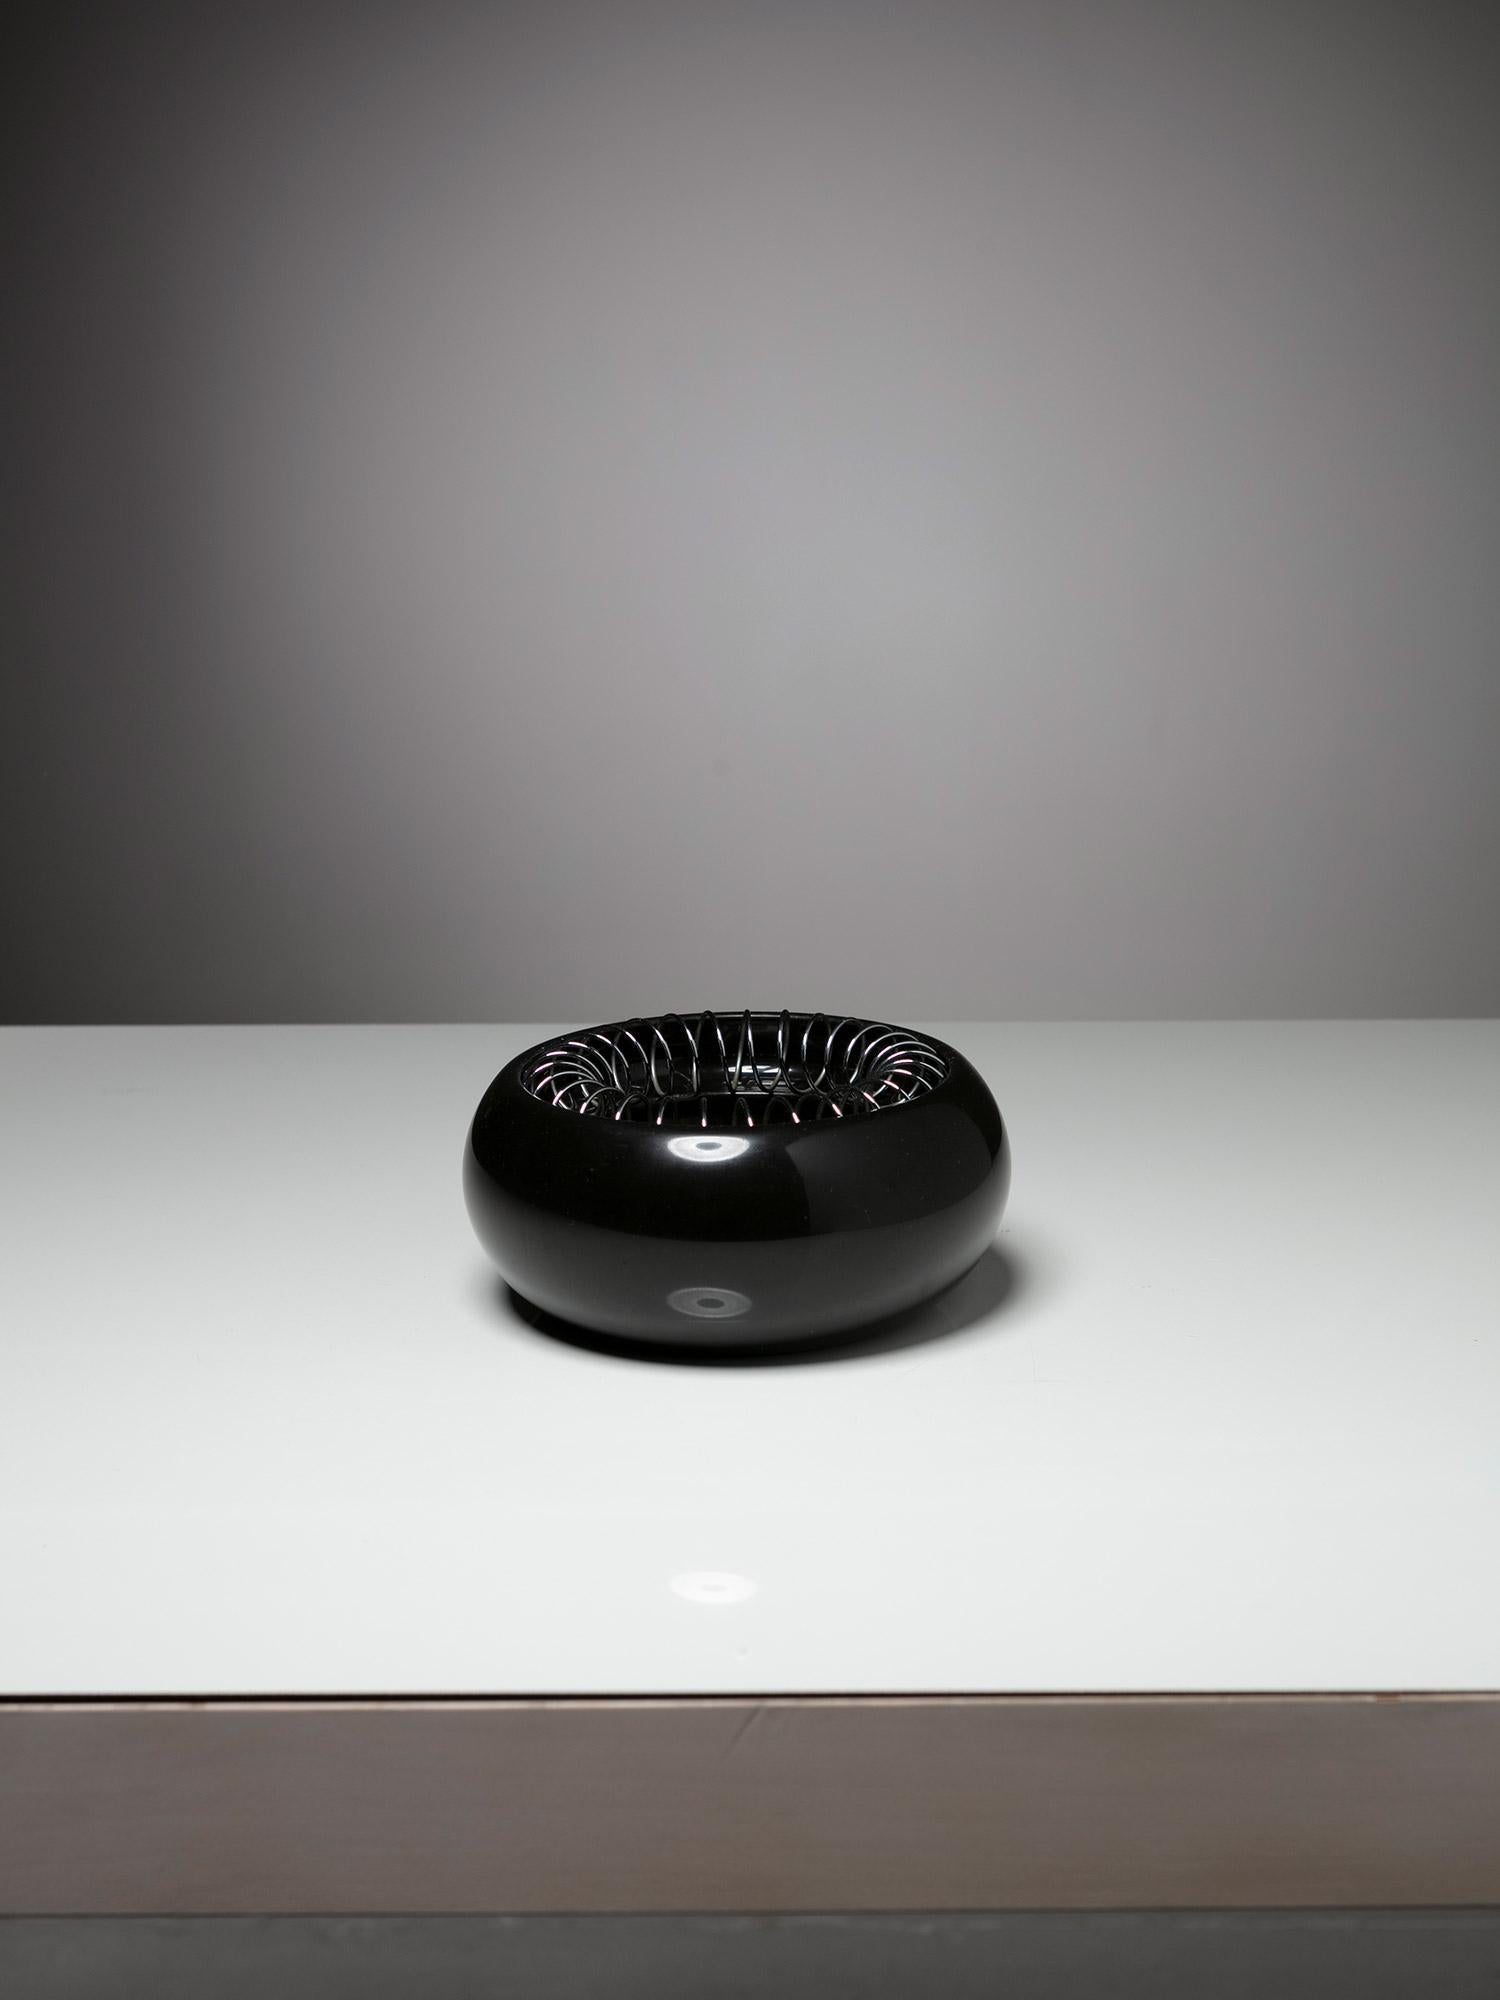 Early Spirale ashtray by Achille Castiglioni for Bacci.
Belgian black marble base and spring steel movable part.